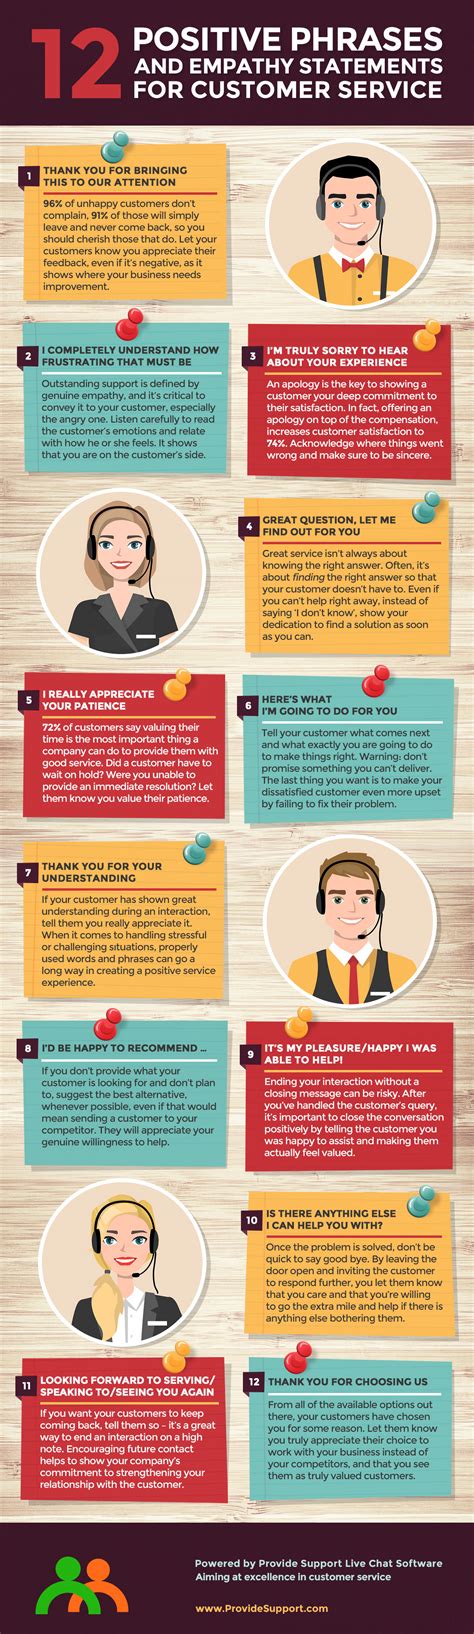 15 empathy statements that help improve customer agent rapport justin